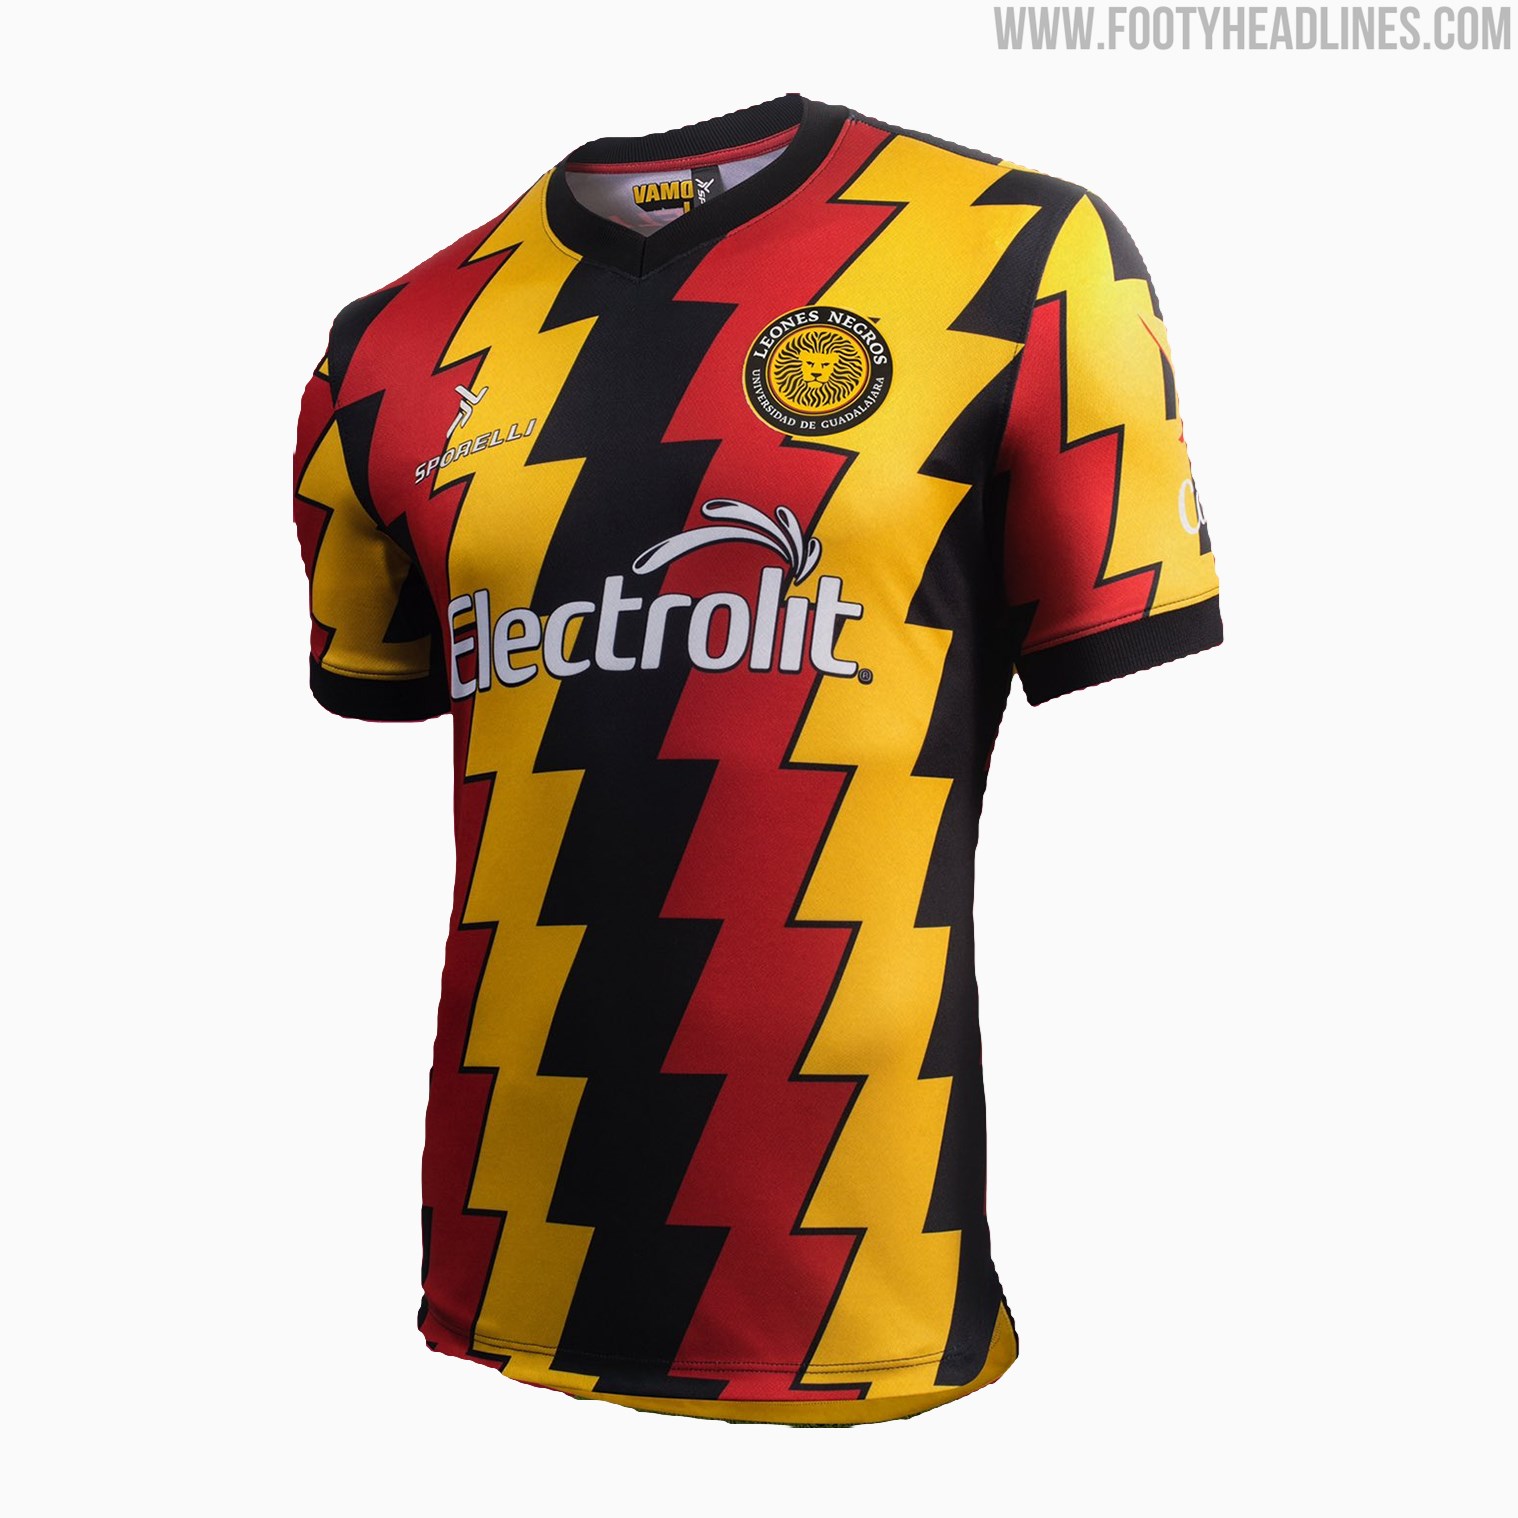 Awesome Leones Negros 22-23 Home Kit Released - Footy Headlines